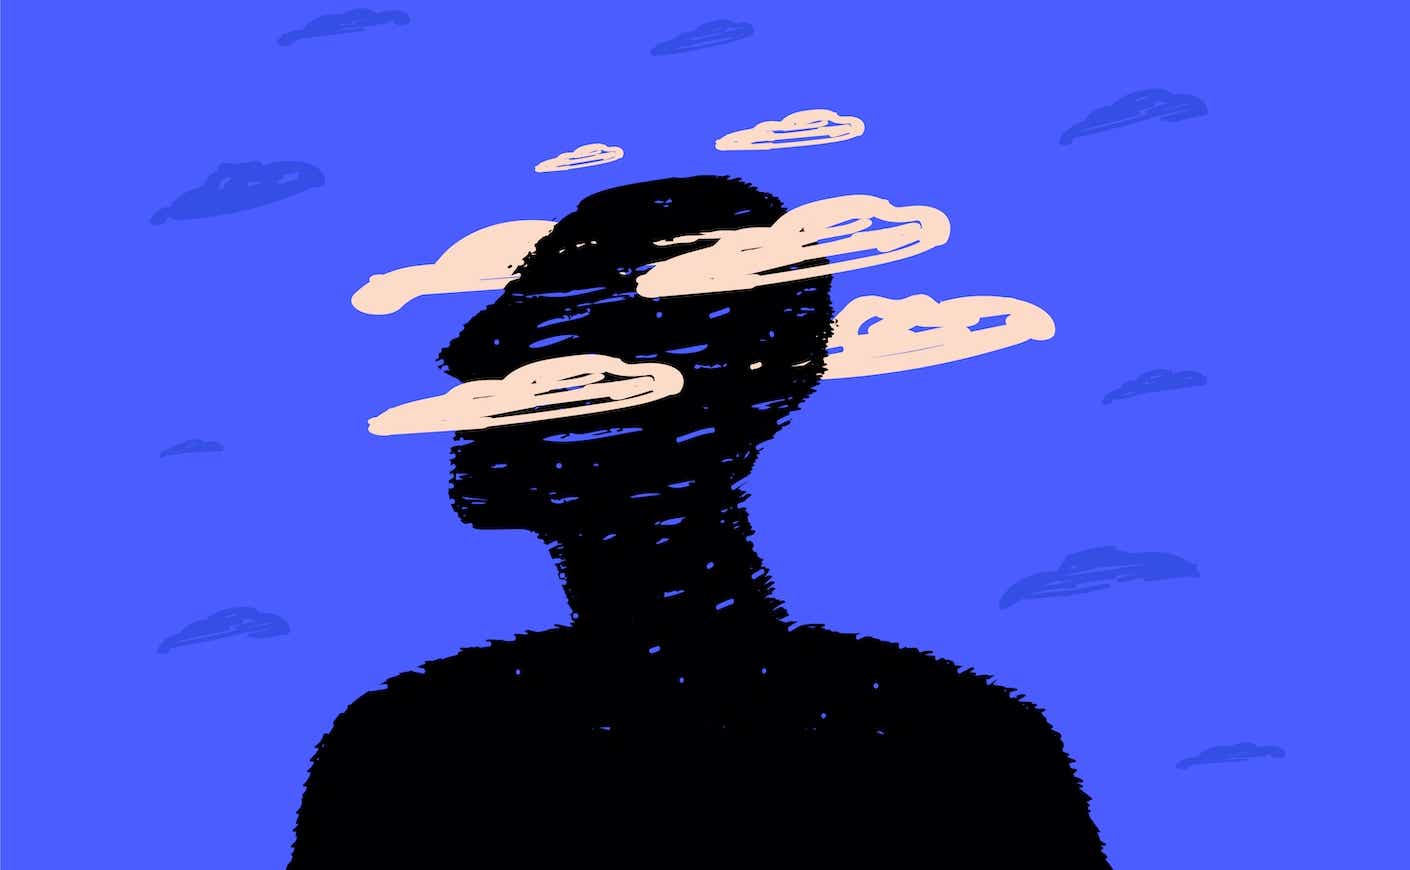 illustration of a silhouette with clouds around the head